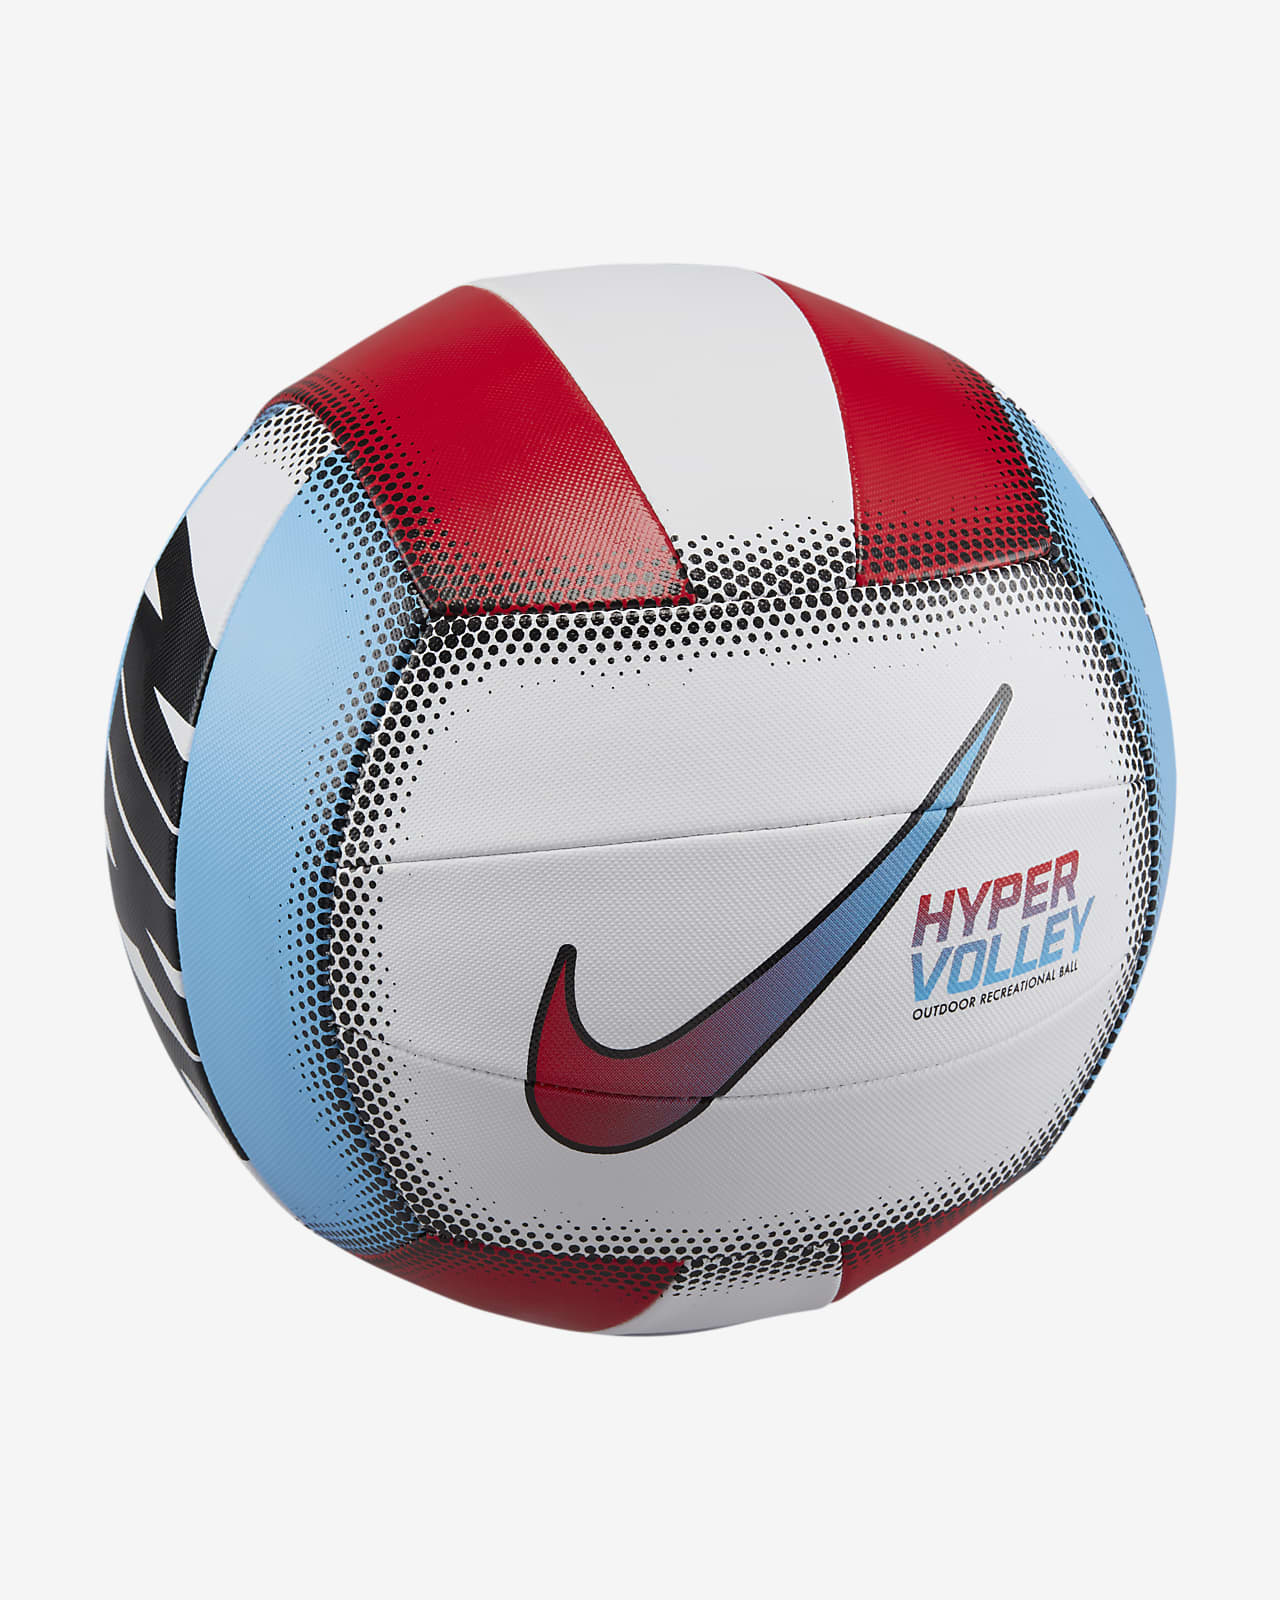 HyperVolley 18P Outdoor Volleyball. Nike.com